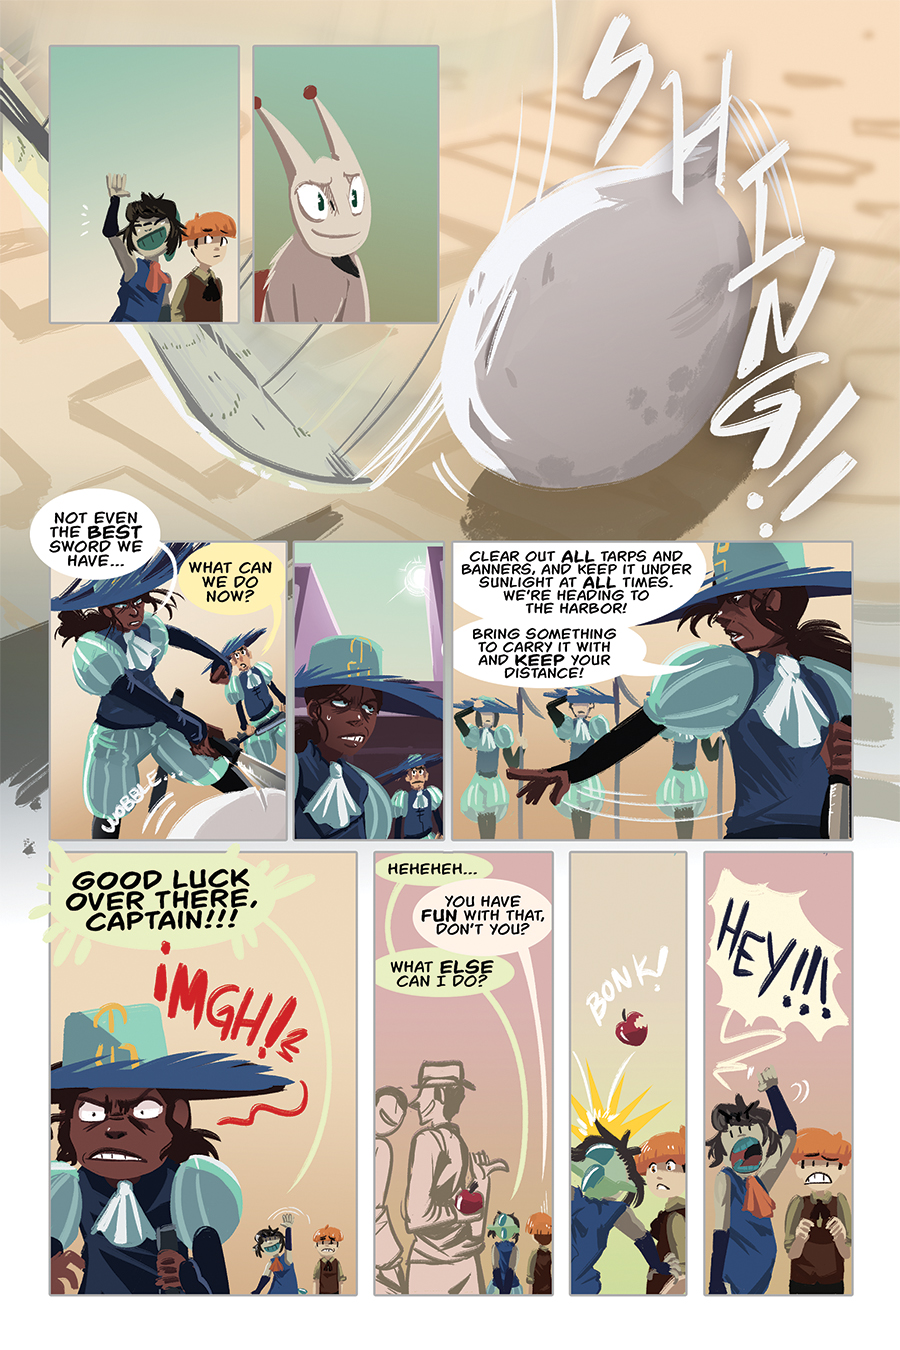 Chapter 8, page 19